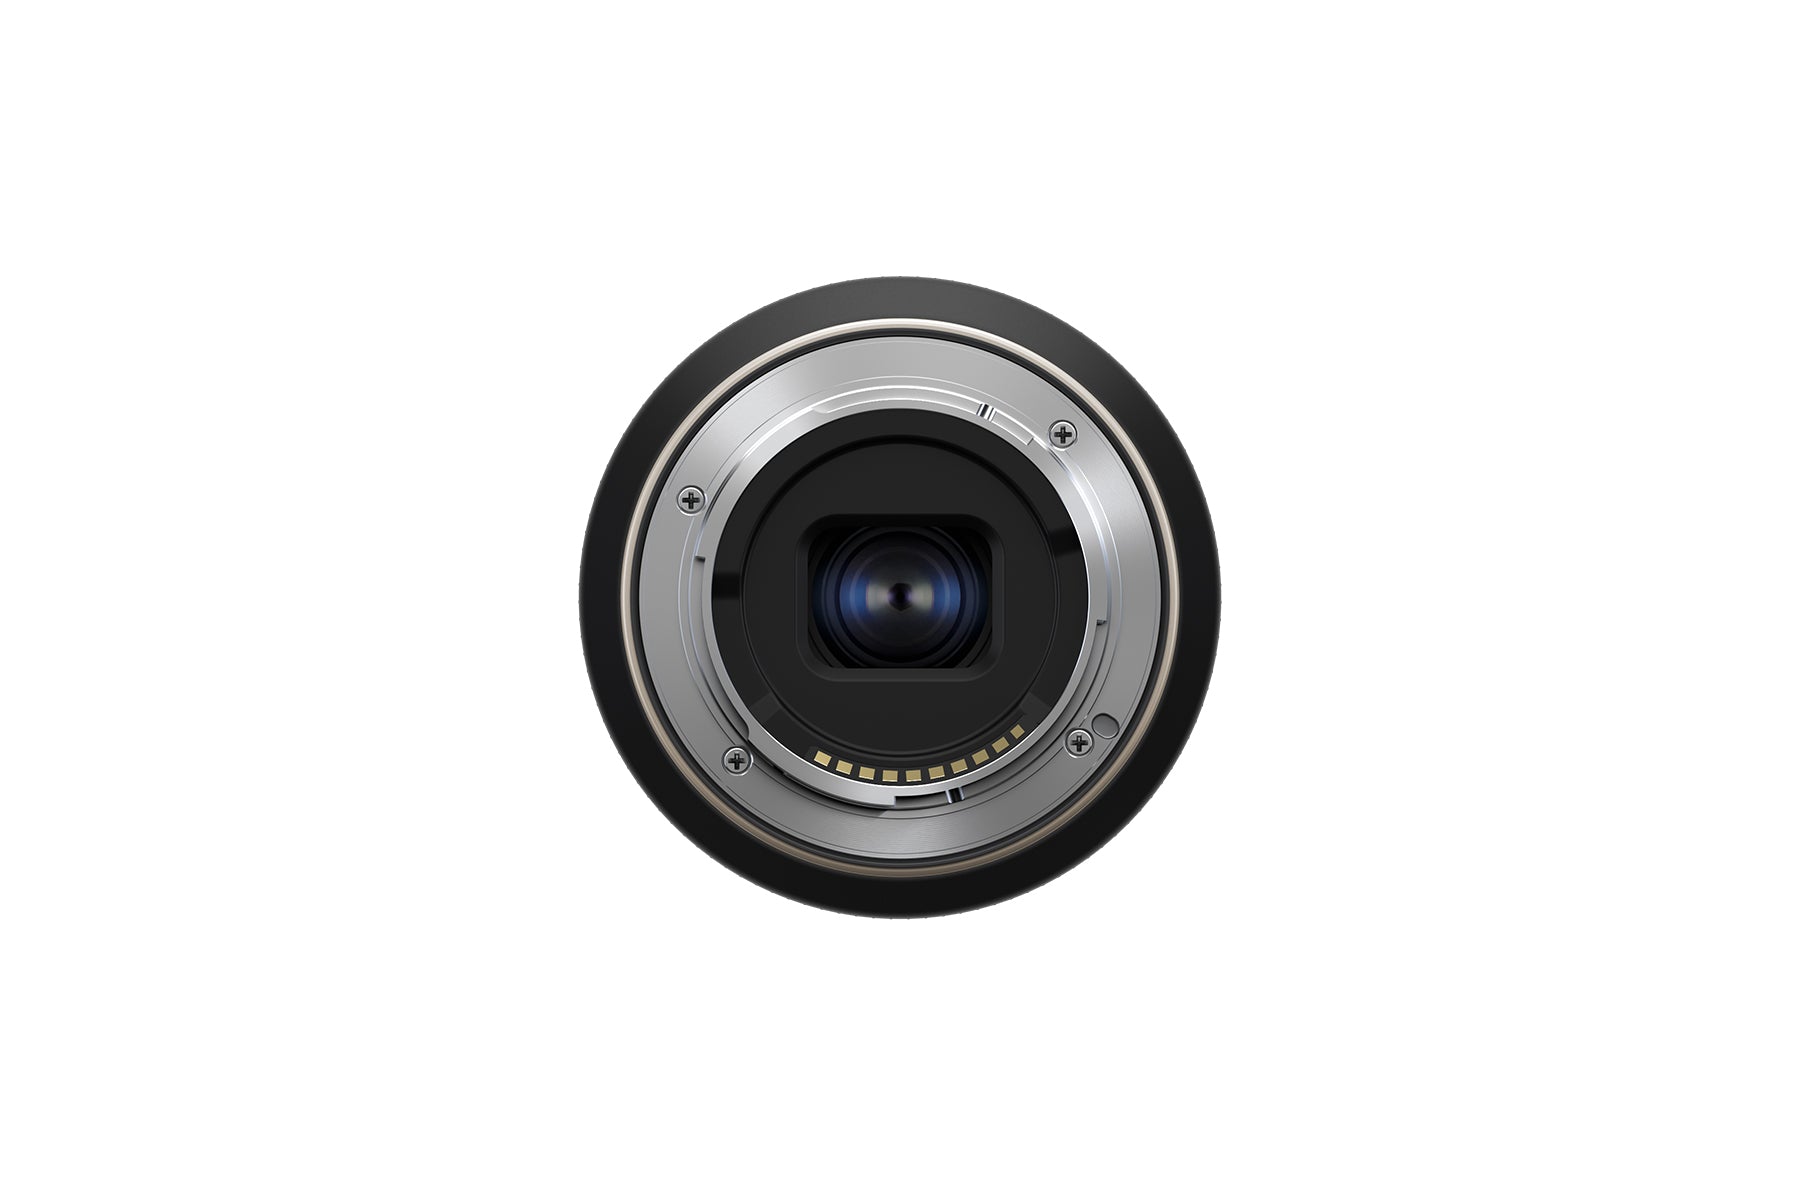 Tamron 11-20mm f/2.8 Di III-A RXD Lens for Sony E Mount | Ritz Camera